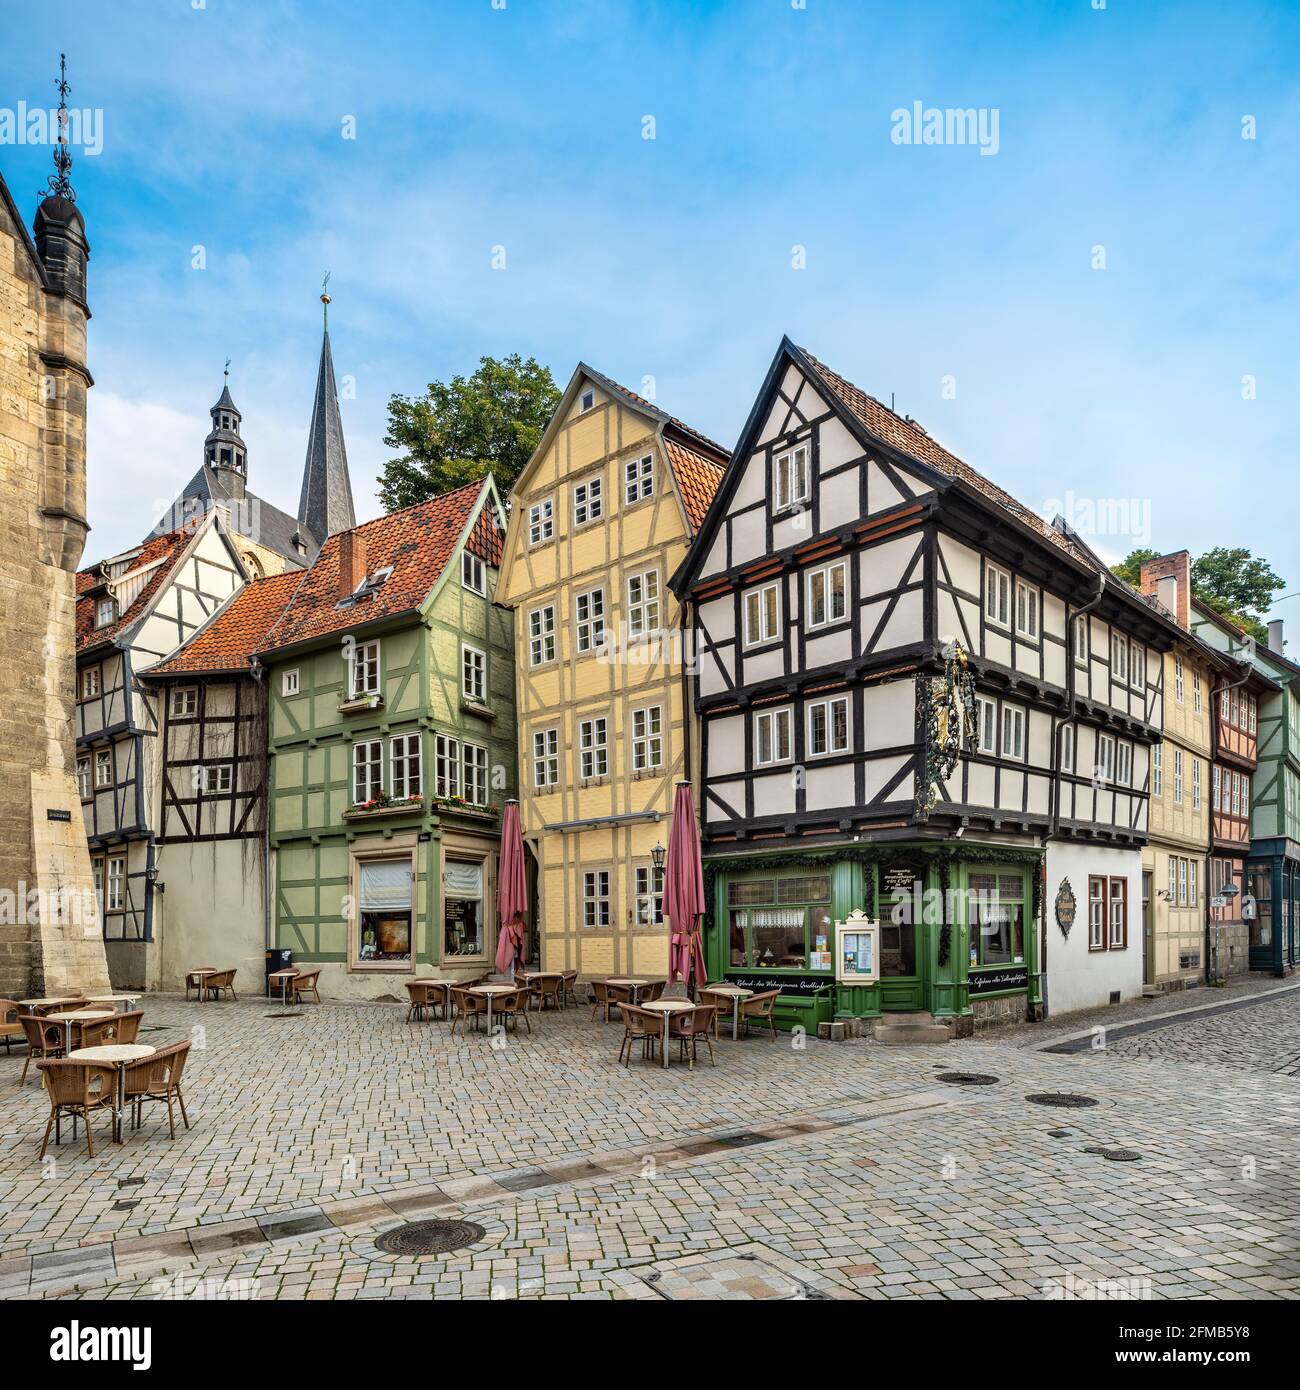 Germany, Saxony-Anhalt, Quedlinburg, crooked and winding half-timbered houses in the historic old town Stock Photo